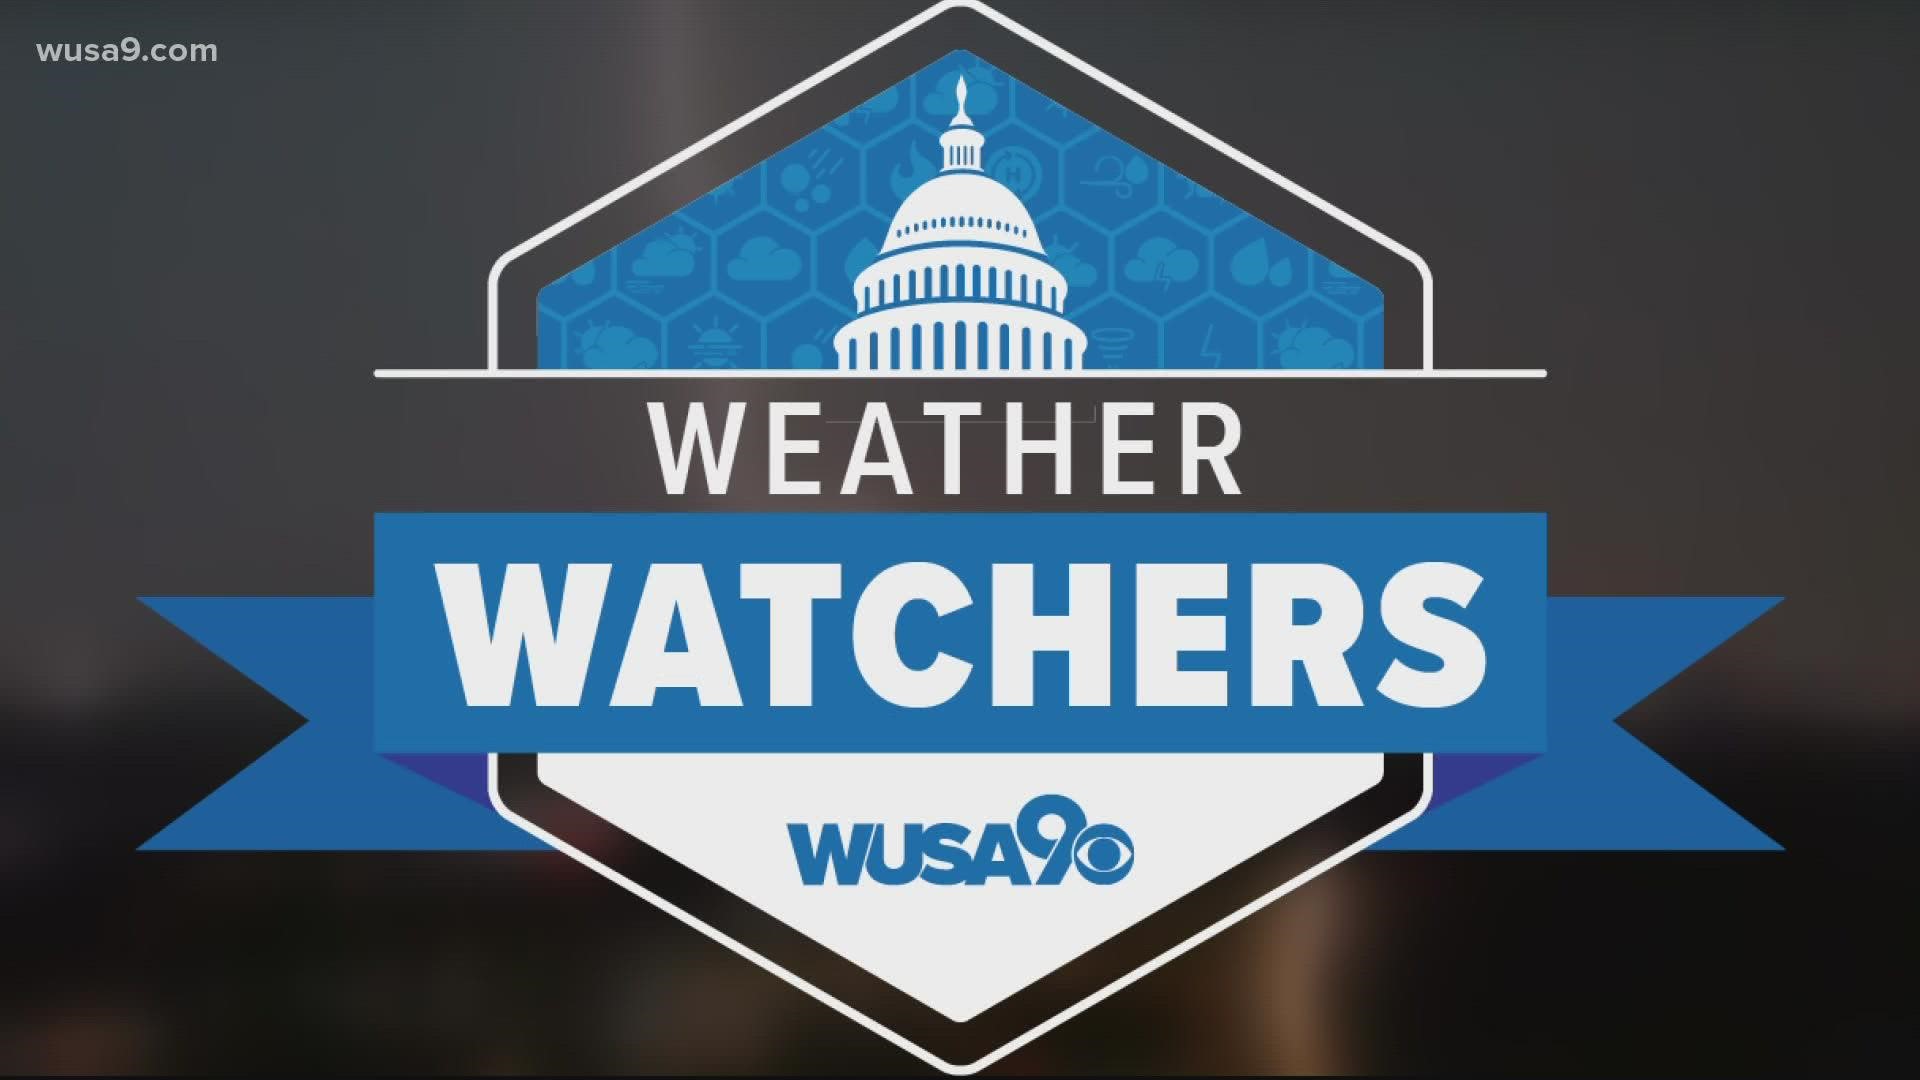 The WUSA9 Weather Watch Team explains what you need to know about Severe Weather in the DC area, and how you can help tell the weather story.